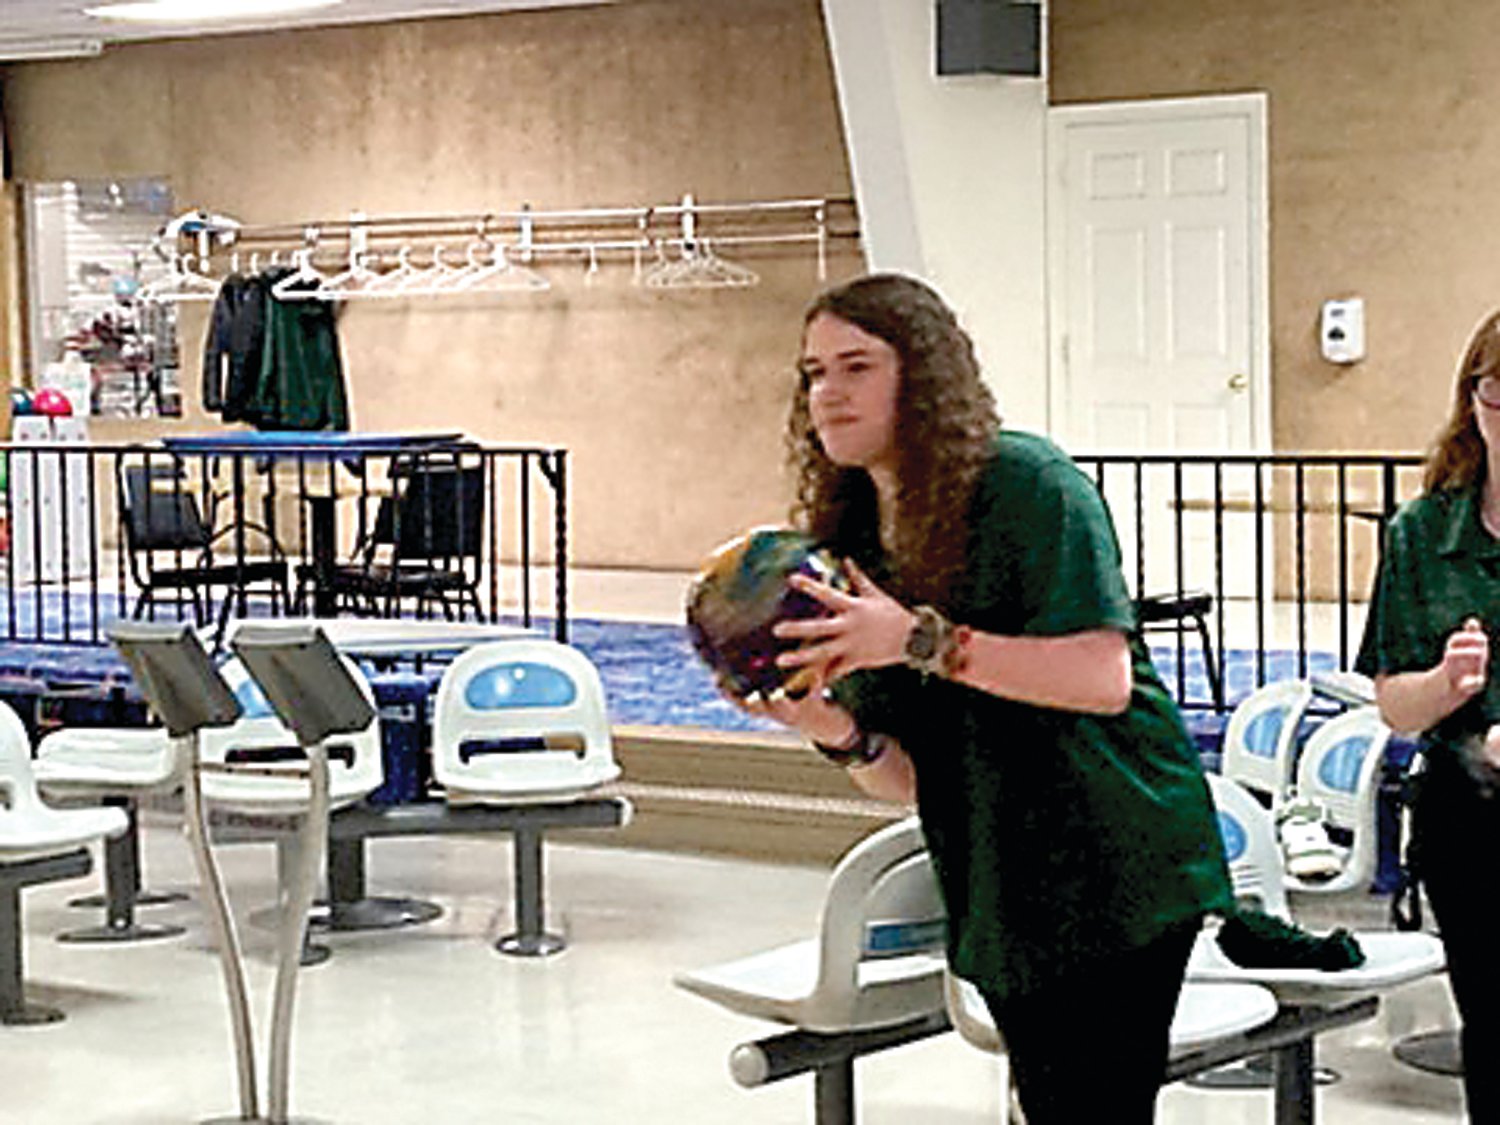 Pennridge girls bowling star Maribeth Baker starts her approach during a recent session at Earl Bowl in Telford.